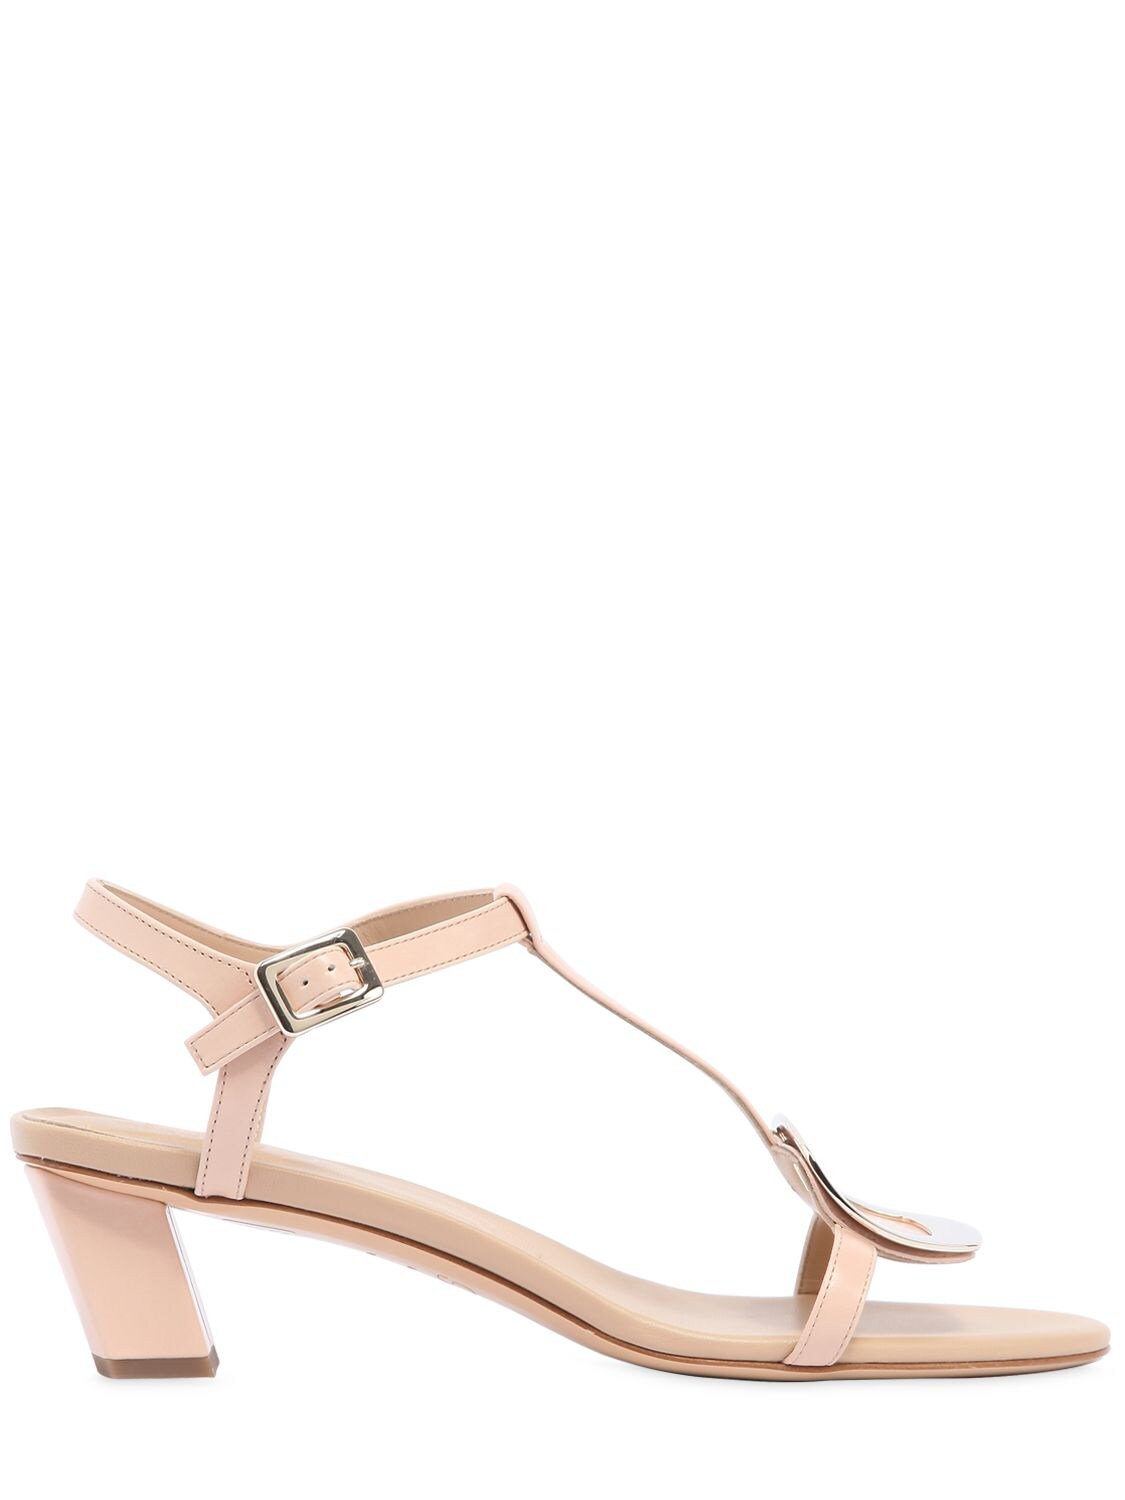 Roger Vivier 45mm Chips Leather Sandals In Nude